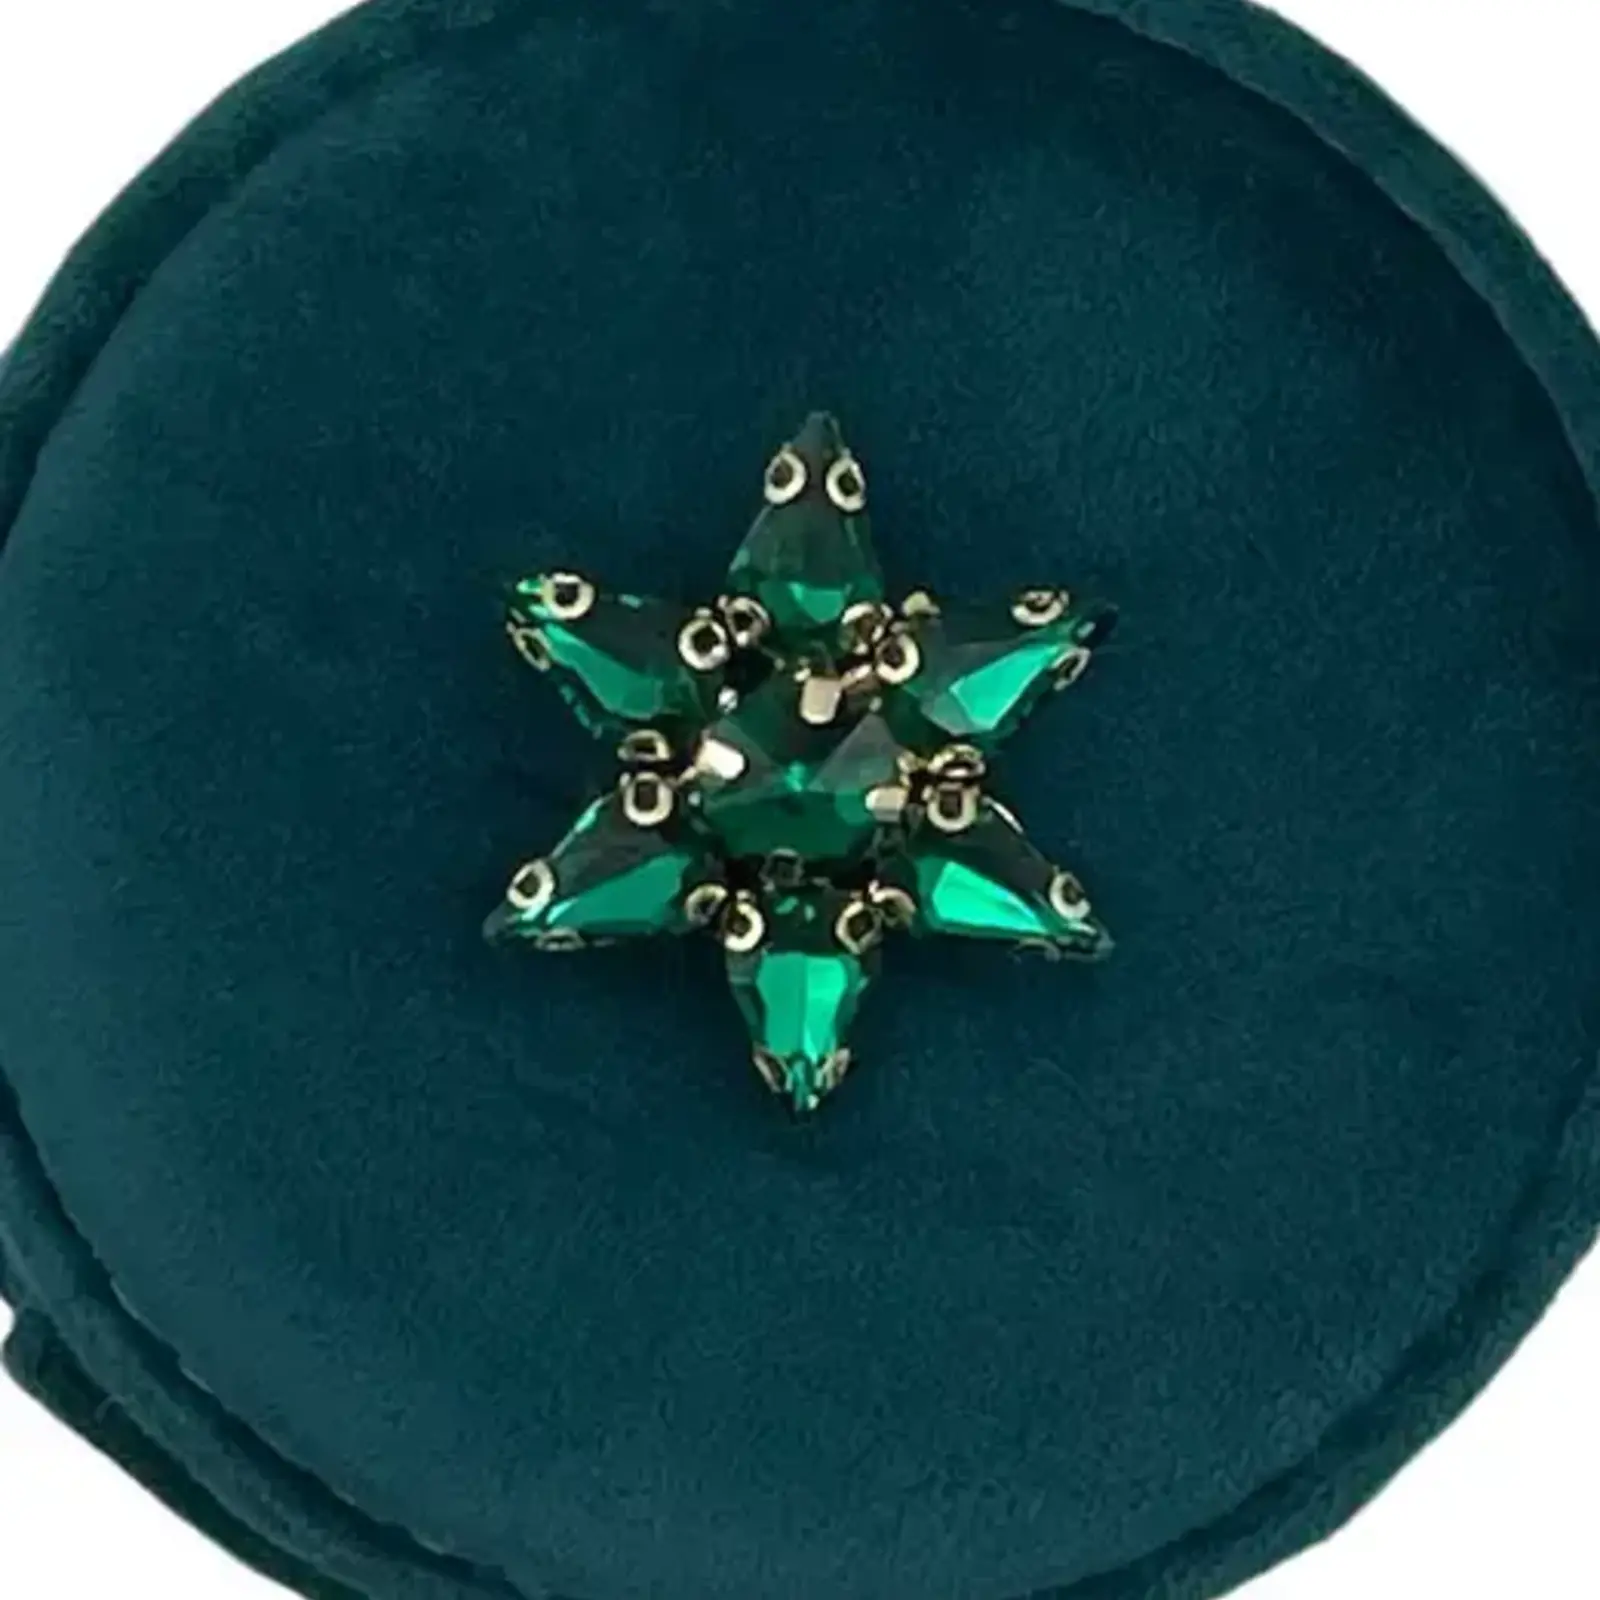 Sixton London Jewelry Travel Pot Velvet Teal   with Sparkle Star loading=